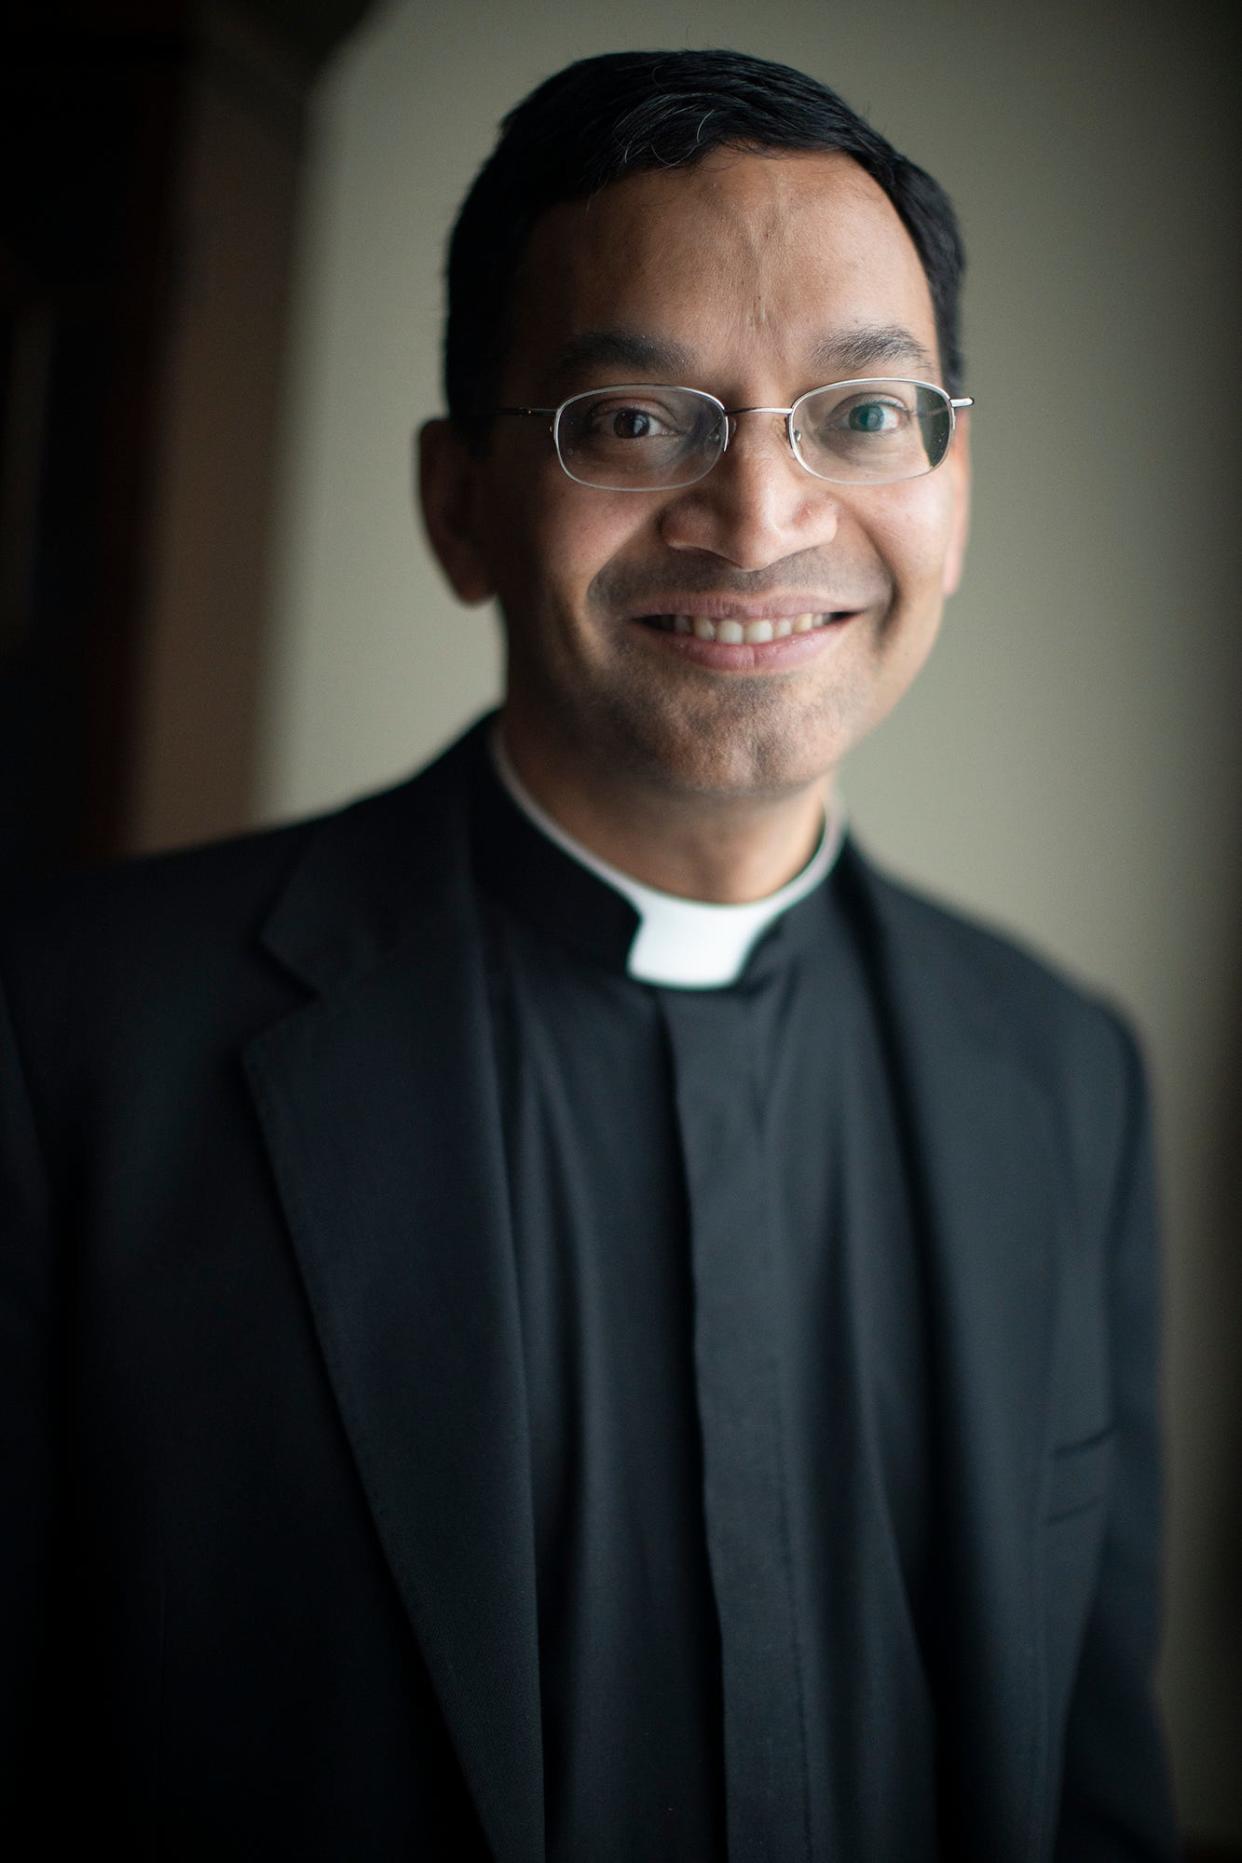 The new Catholic Bishop for the Diocese of Columbus, the Rev. Earl Fernandes, will be installed Tuesday.